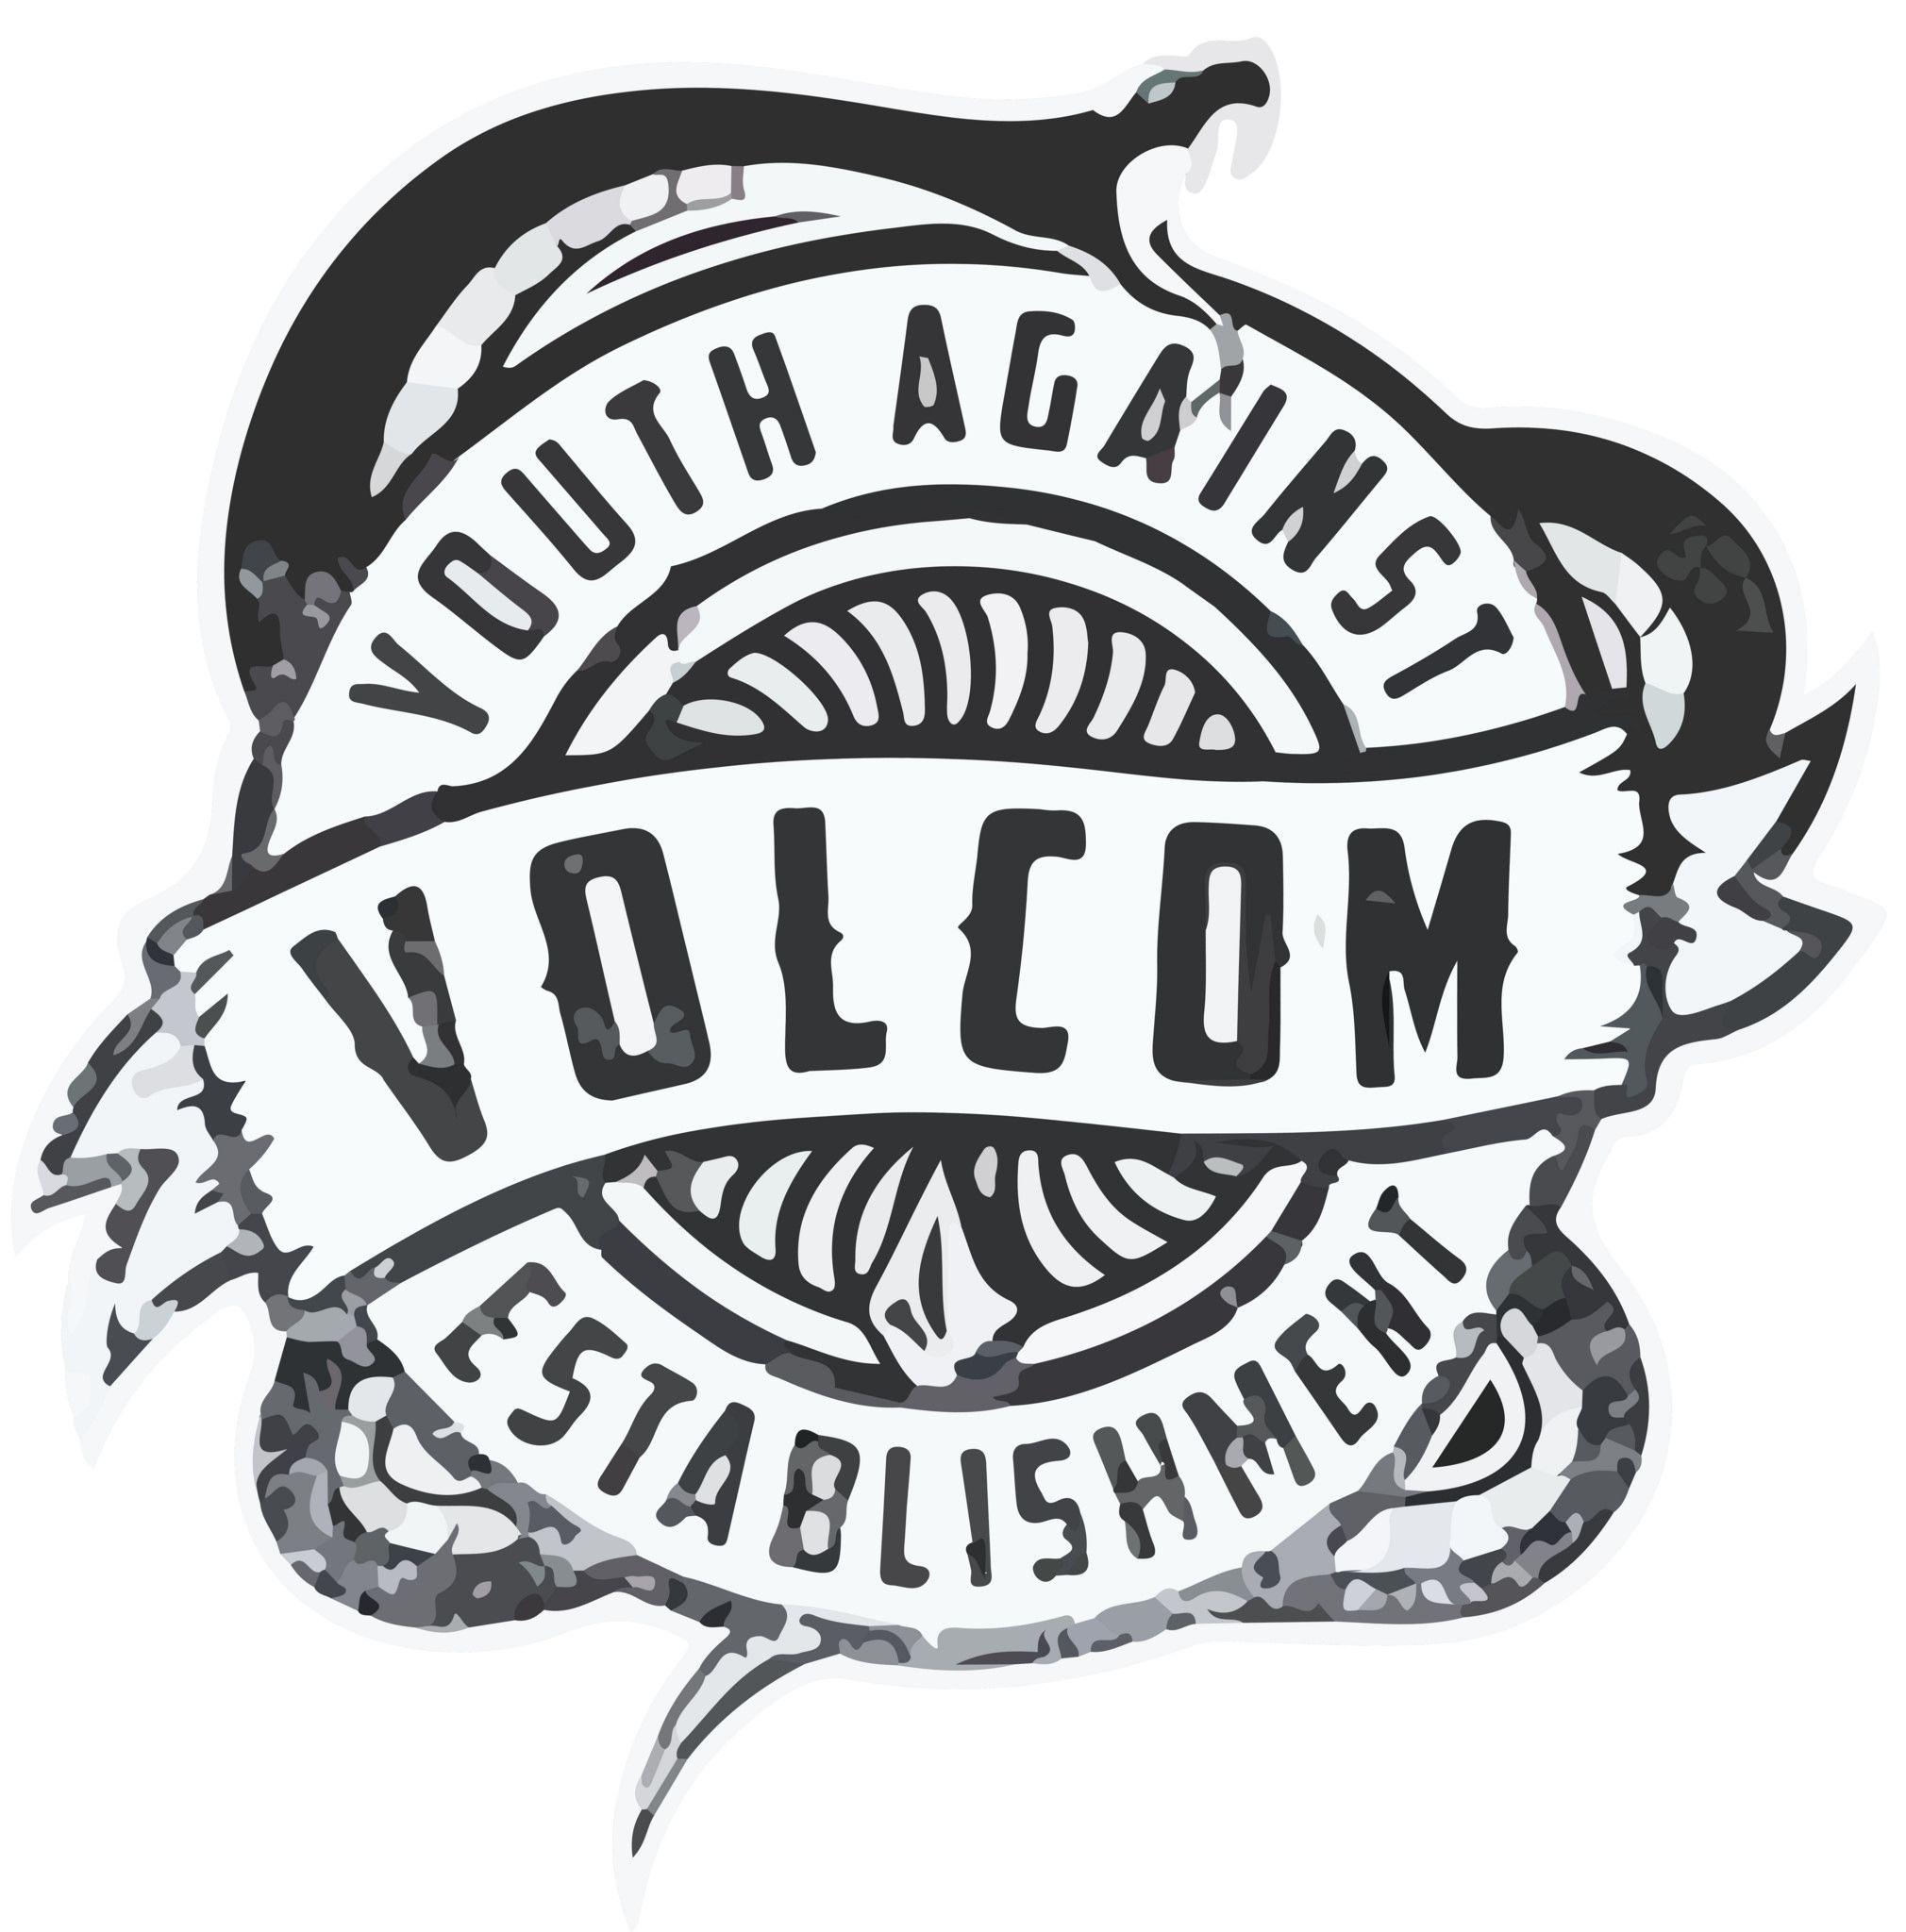 Volcom Vector Logo - Volcom 8170x8282px | All icons are in PNG, Flickr doesn't sh… | Flickr